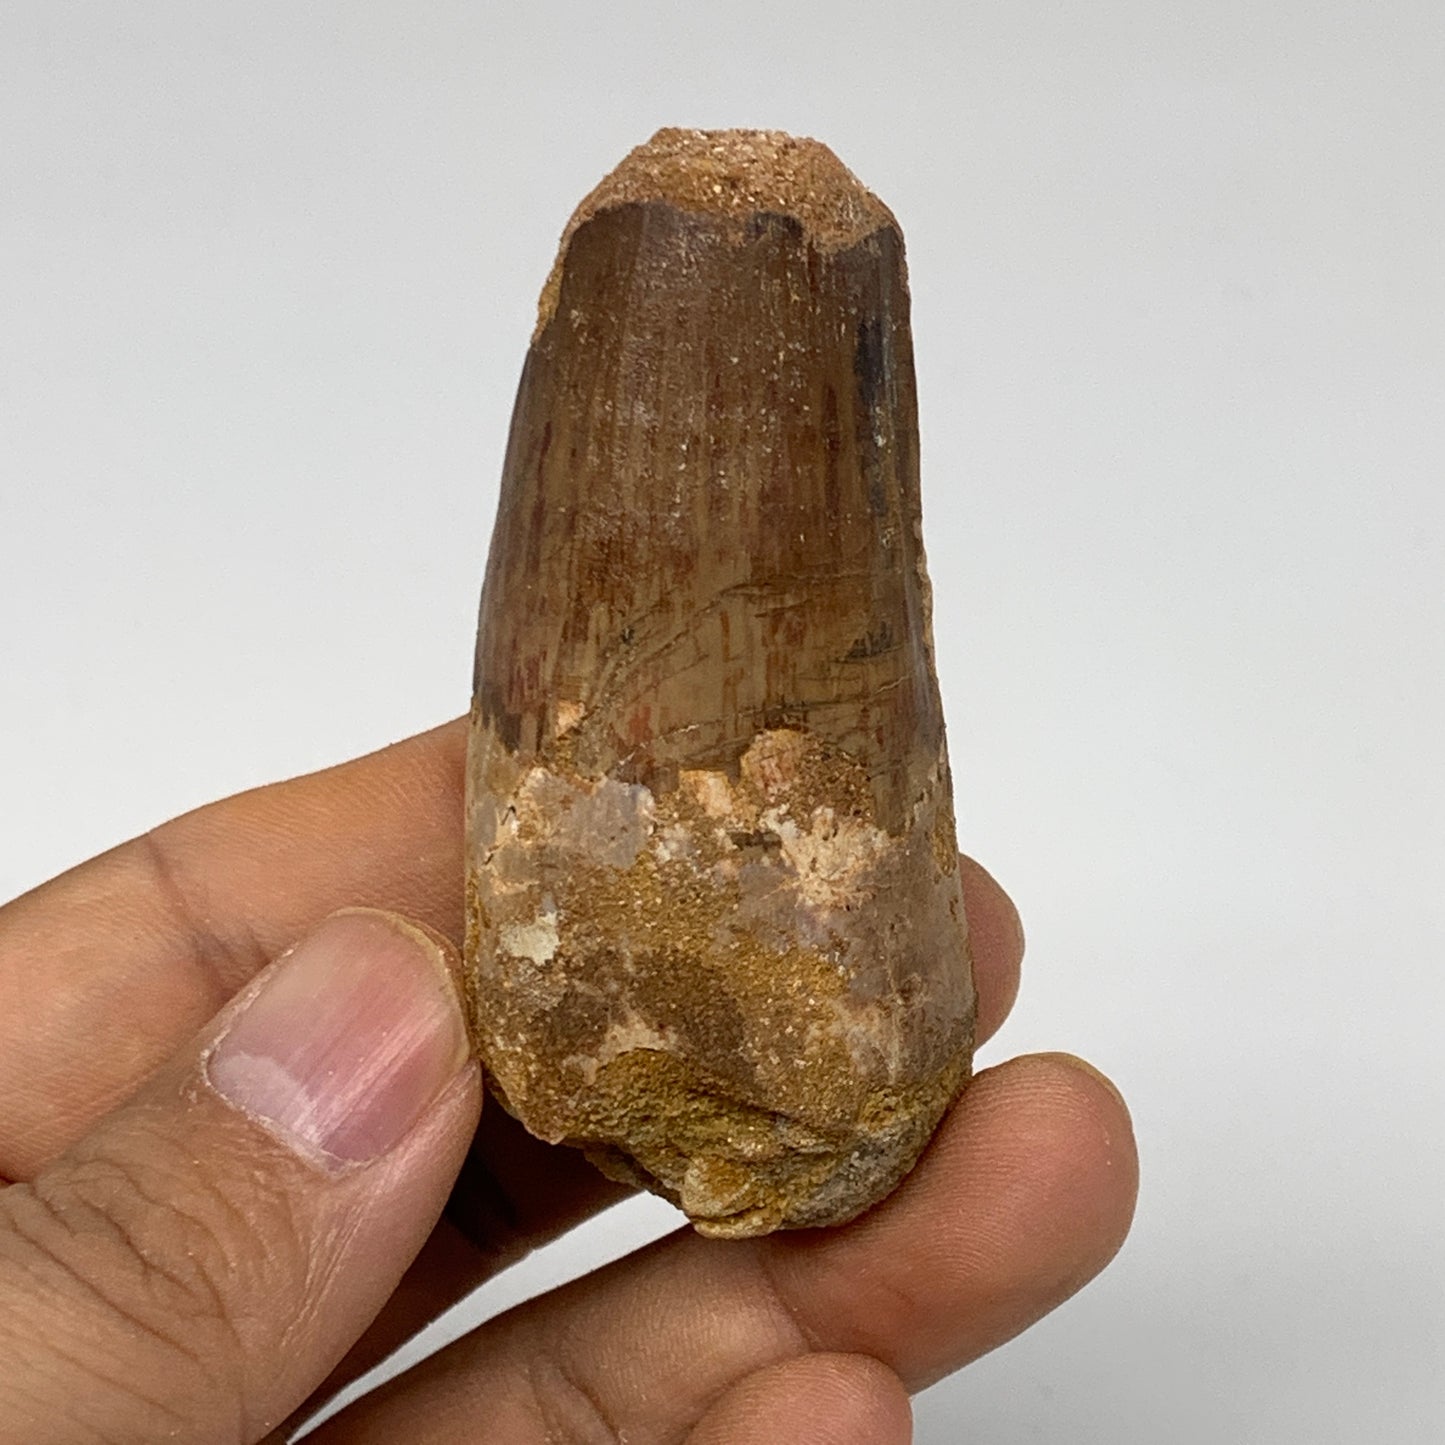 48.1g, 2.5"X1.2"x 1", Rare Natural Fossils Spinosaurus Tooth from Morocco, F3230